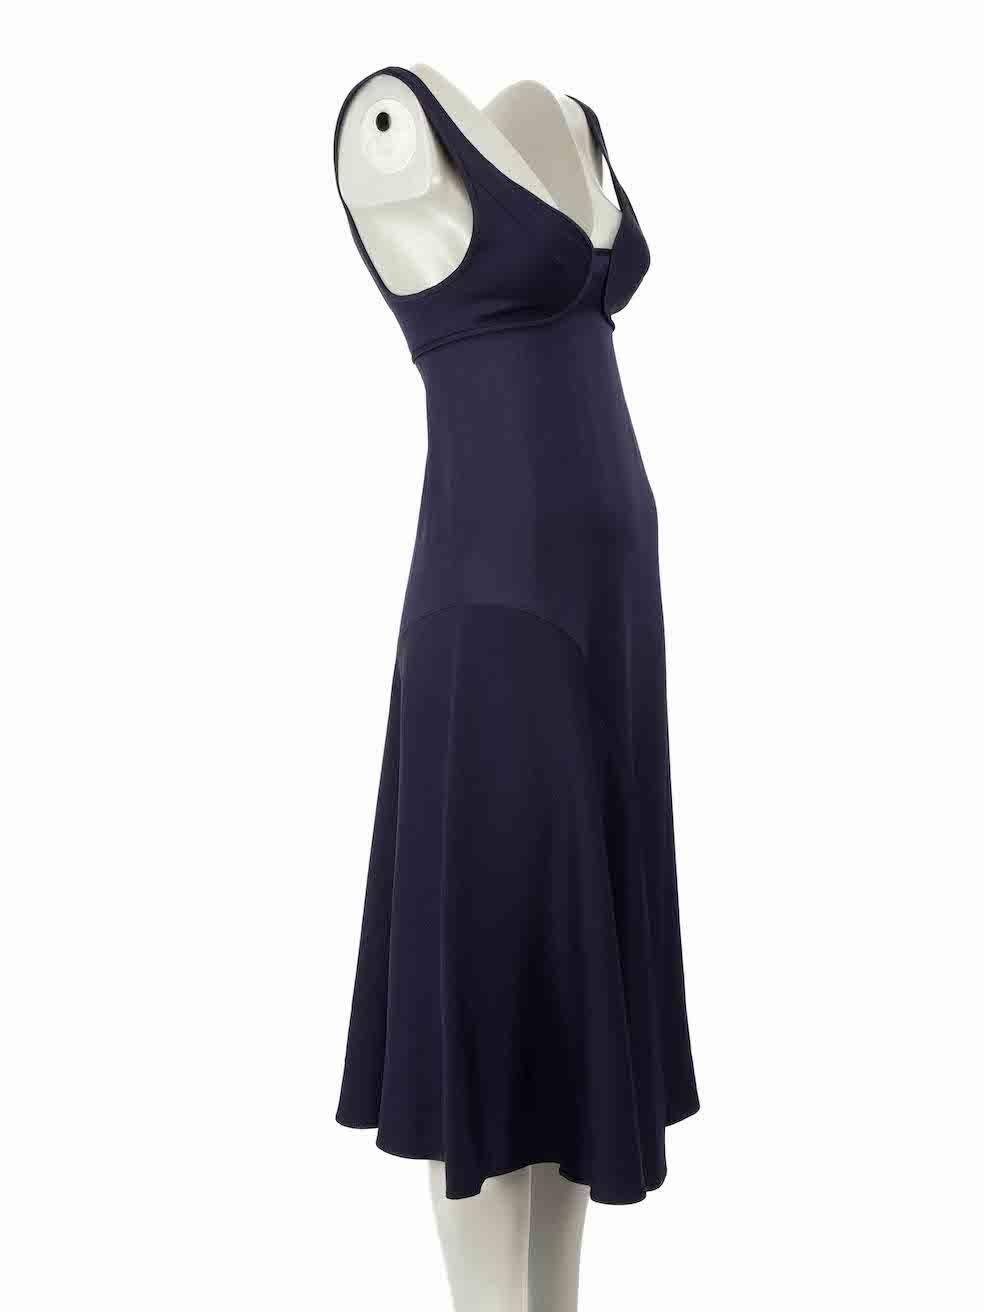 CONDITION is Never worn, with tags. No visible wear to dress is evident on this new Victoria Beckham designer resale item.
 
Details
Navy
Synthetic
Slip dress
Sleeveless
Sweetheart neckline
Bustier top
Midi
Back zip and hook fastening
 
Made in